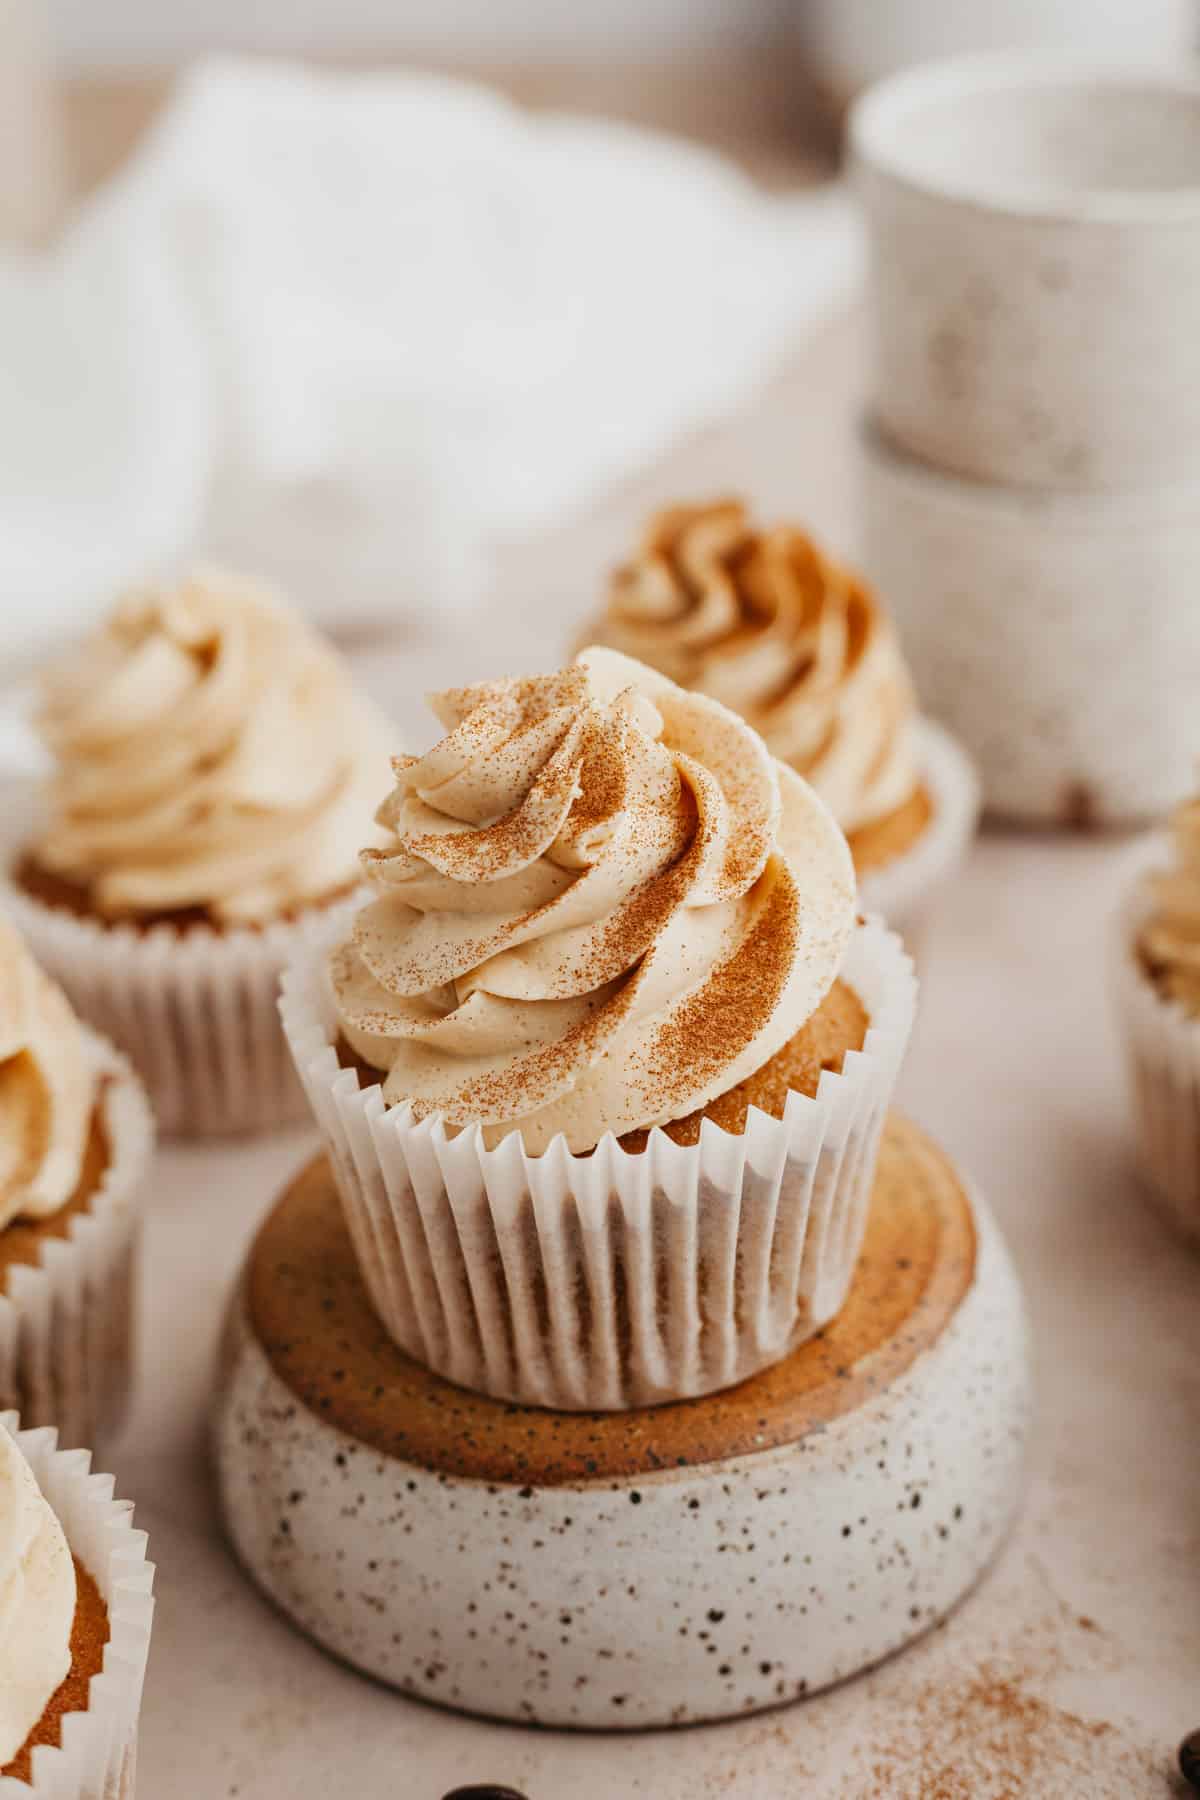 A close up of an espresso cupcake on an upturned bowl.